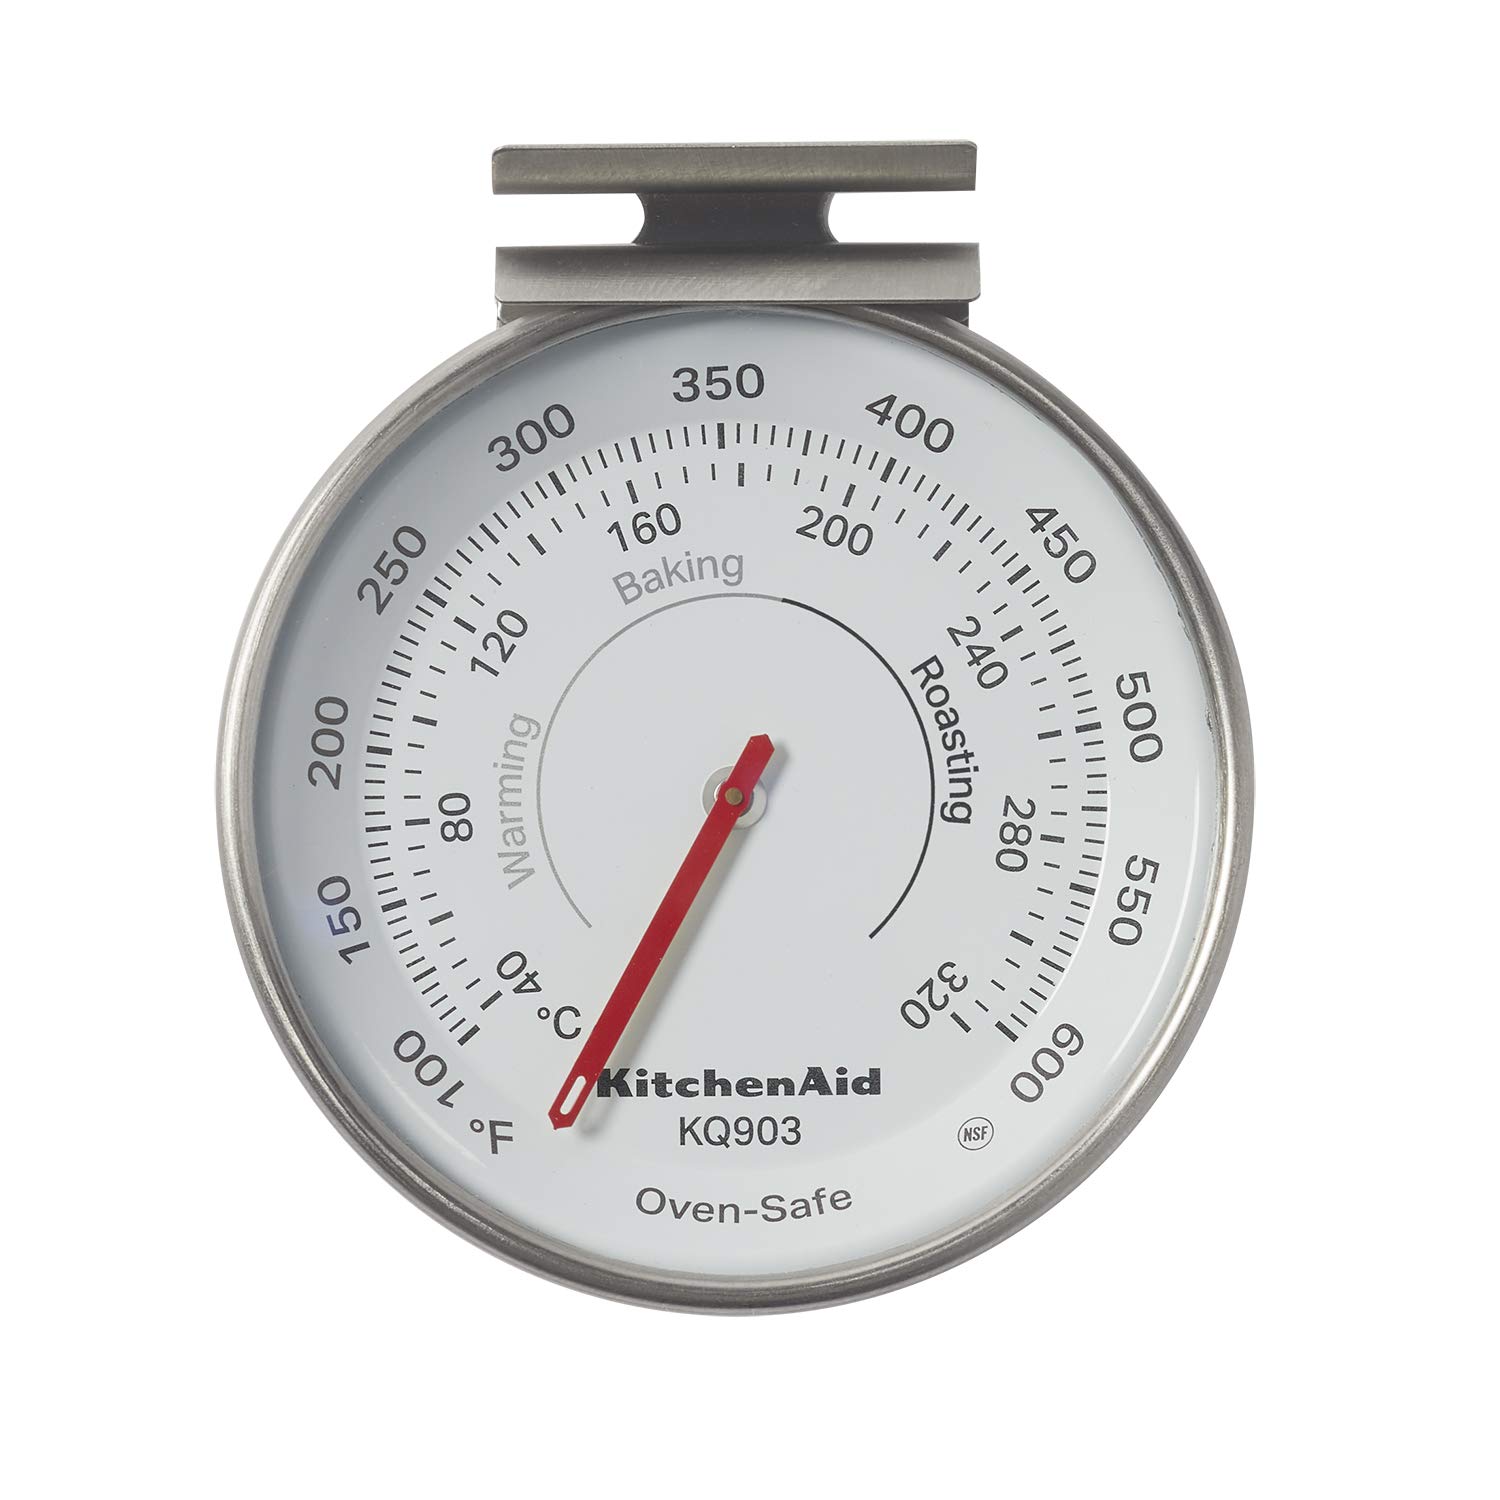 KitchenAid KQ903 3-in Analog Dial Oven/Appliance Thermometer, TEMPERATURE RANGE: 100F to 600F, Stainless Steel